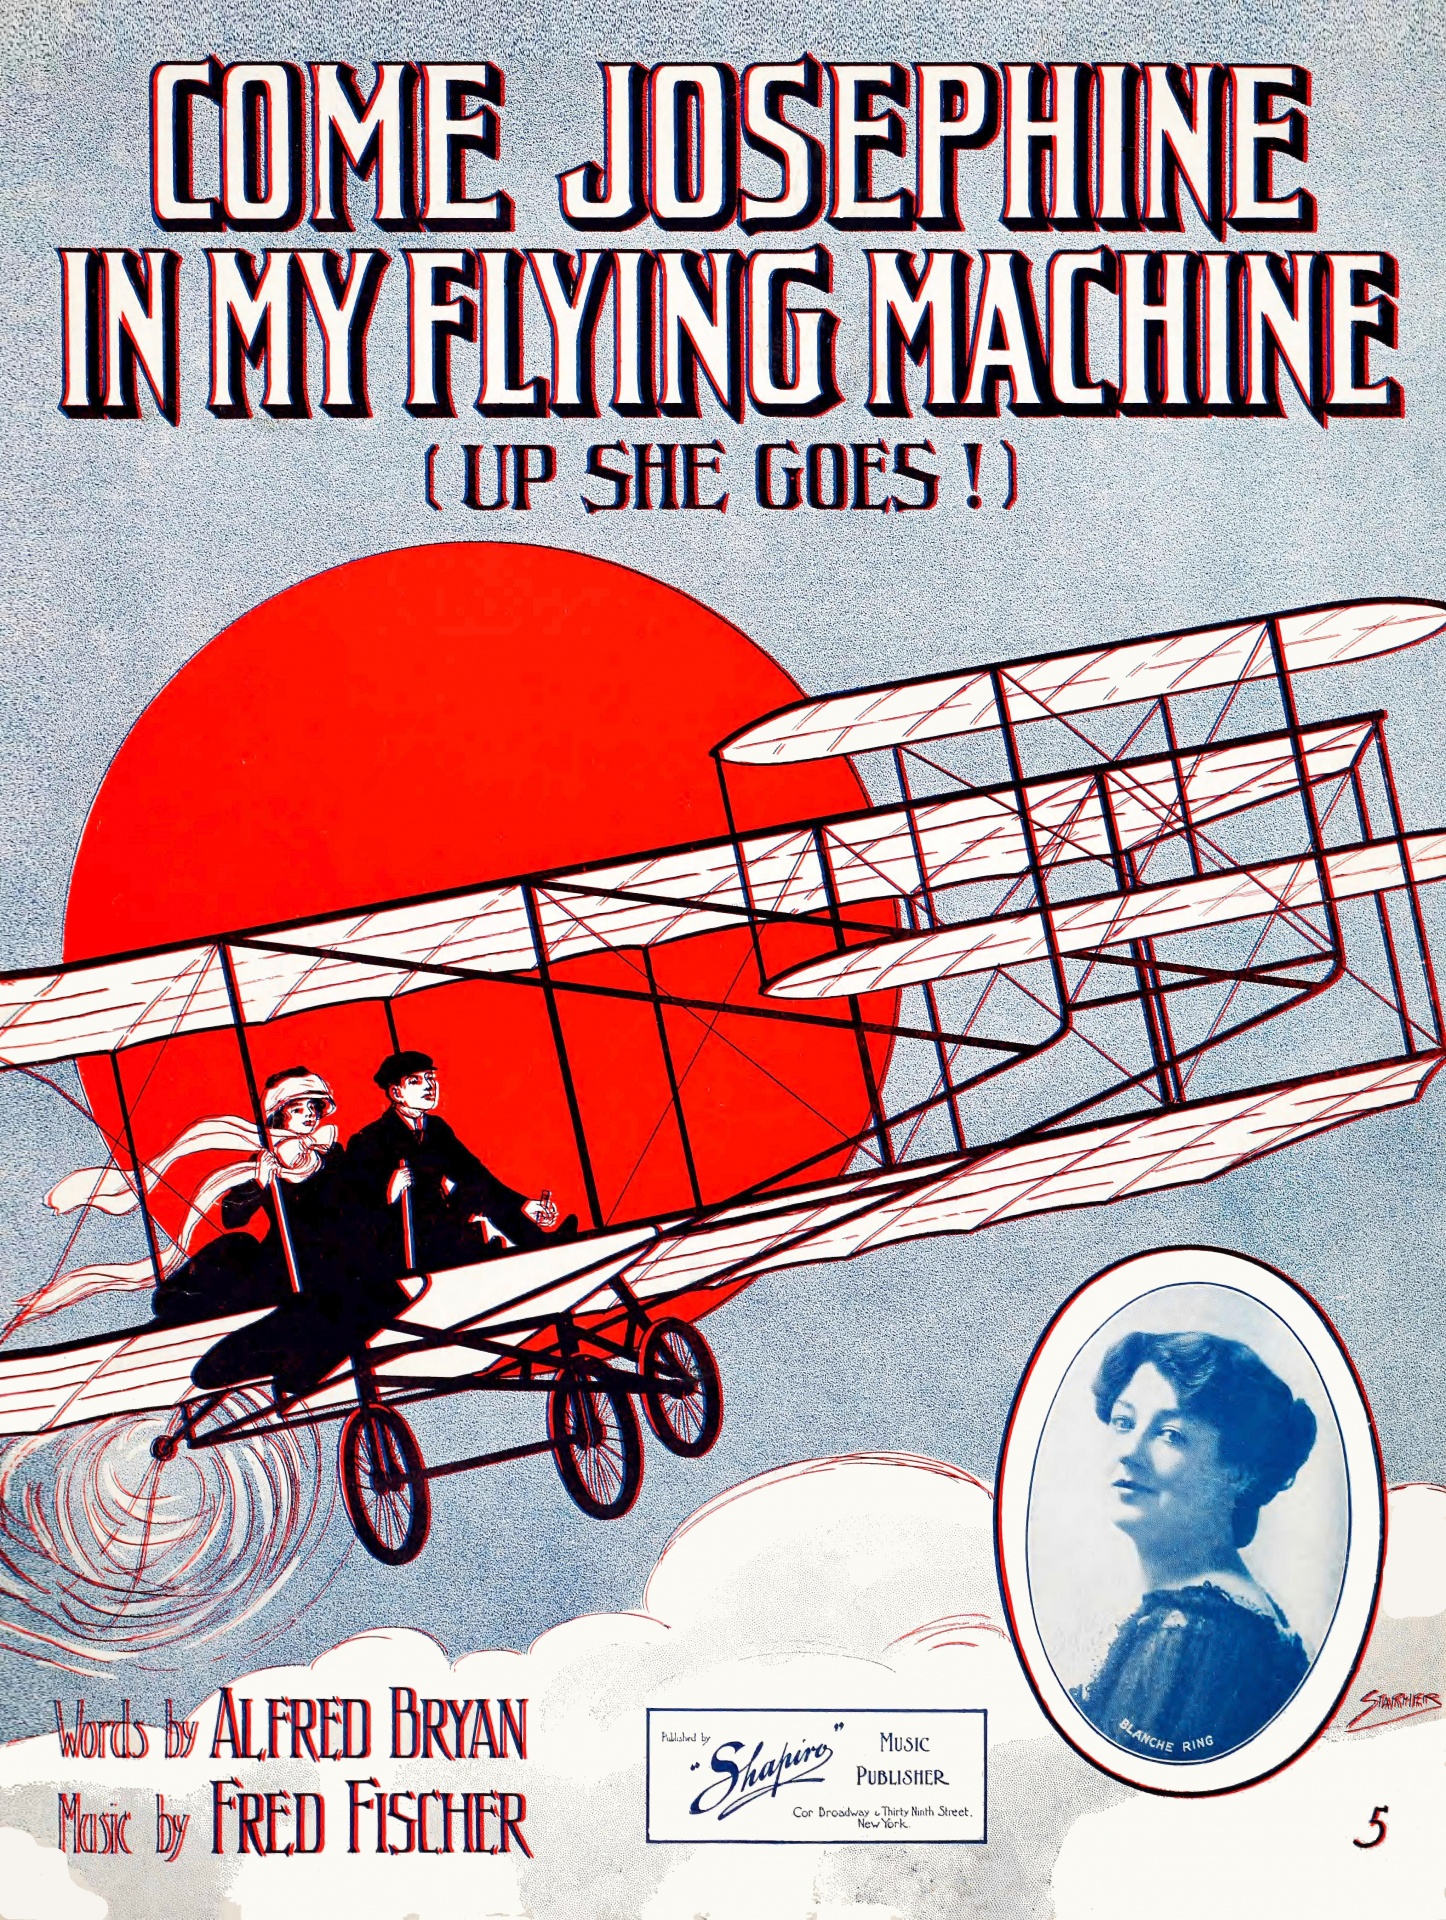 This 1910 vintage sheet music cover features a man and woman in a biplane with an inset portrait photograph of Blanche Ring, an early American vaudeville star, singer and Broadway actress.